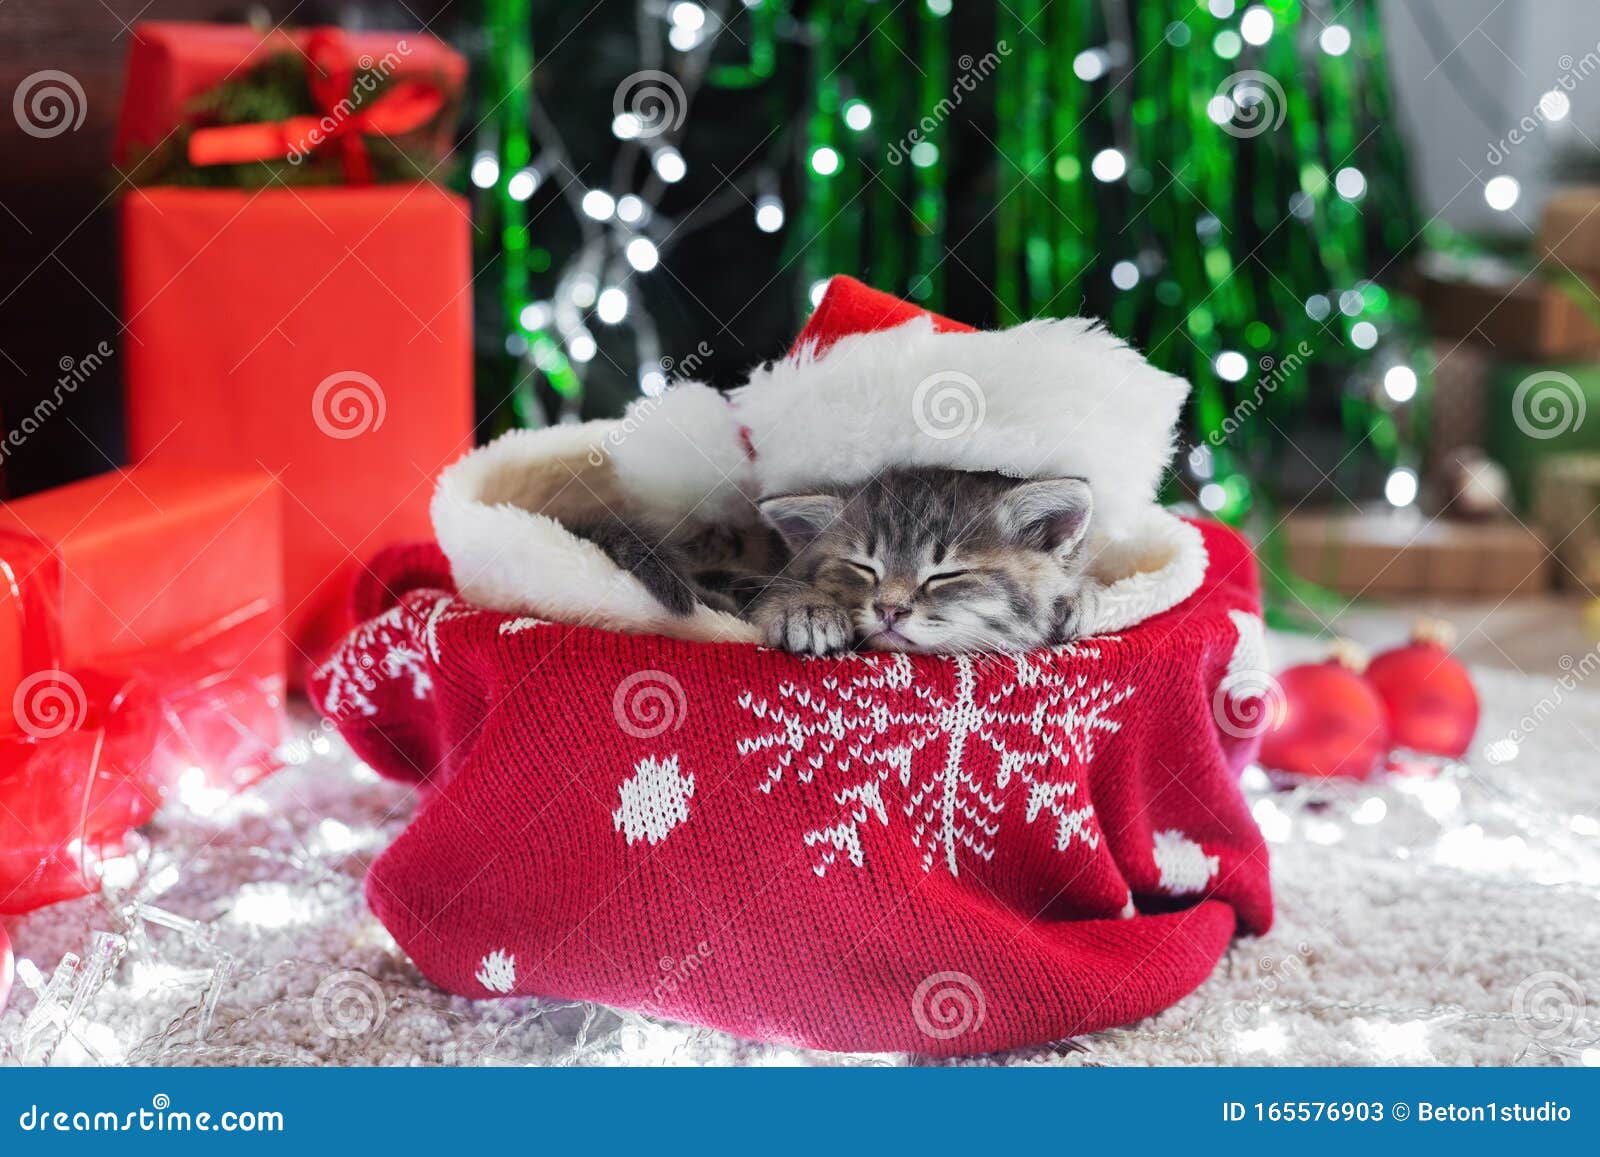 Christmas Cat Wearing Santa Claus Hat Holding Gift Box Sleeping On Plaid Under Christmas Tree Christmas Presents Concept Cozy Stock Image Image Of Kitten Kitty 165576903